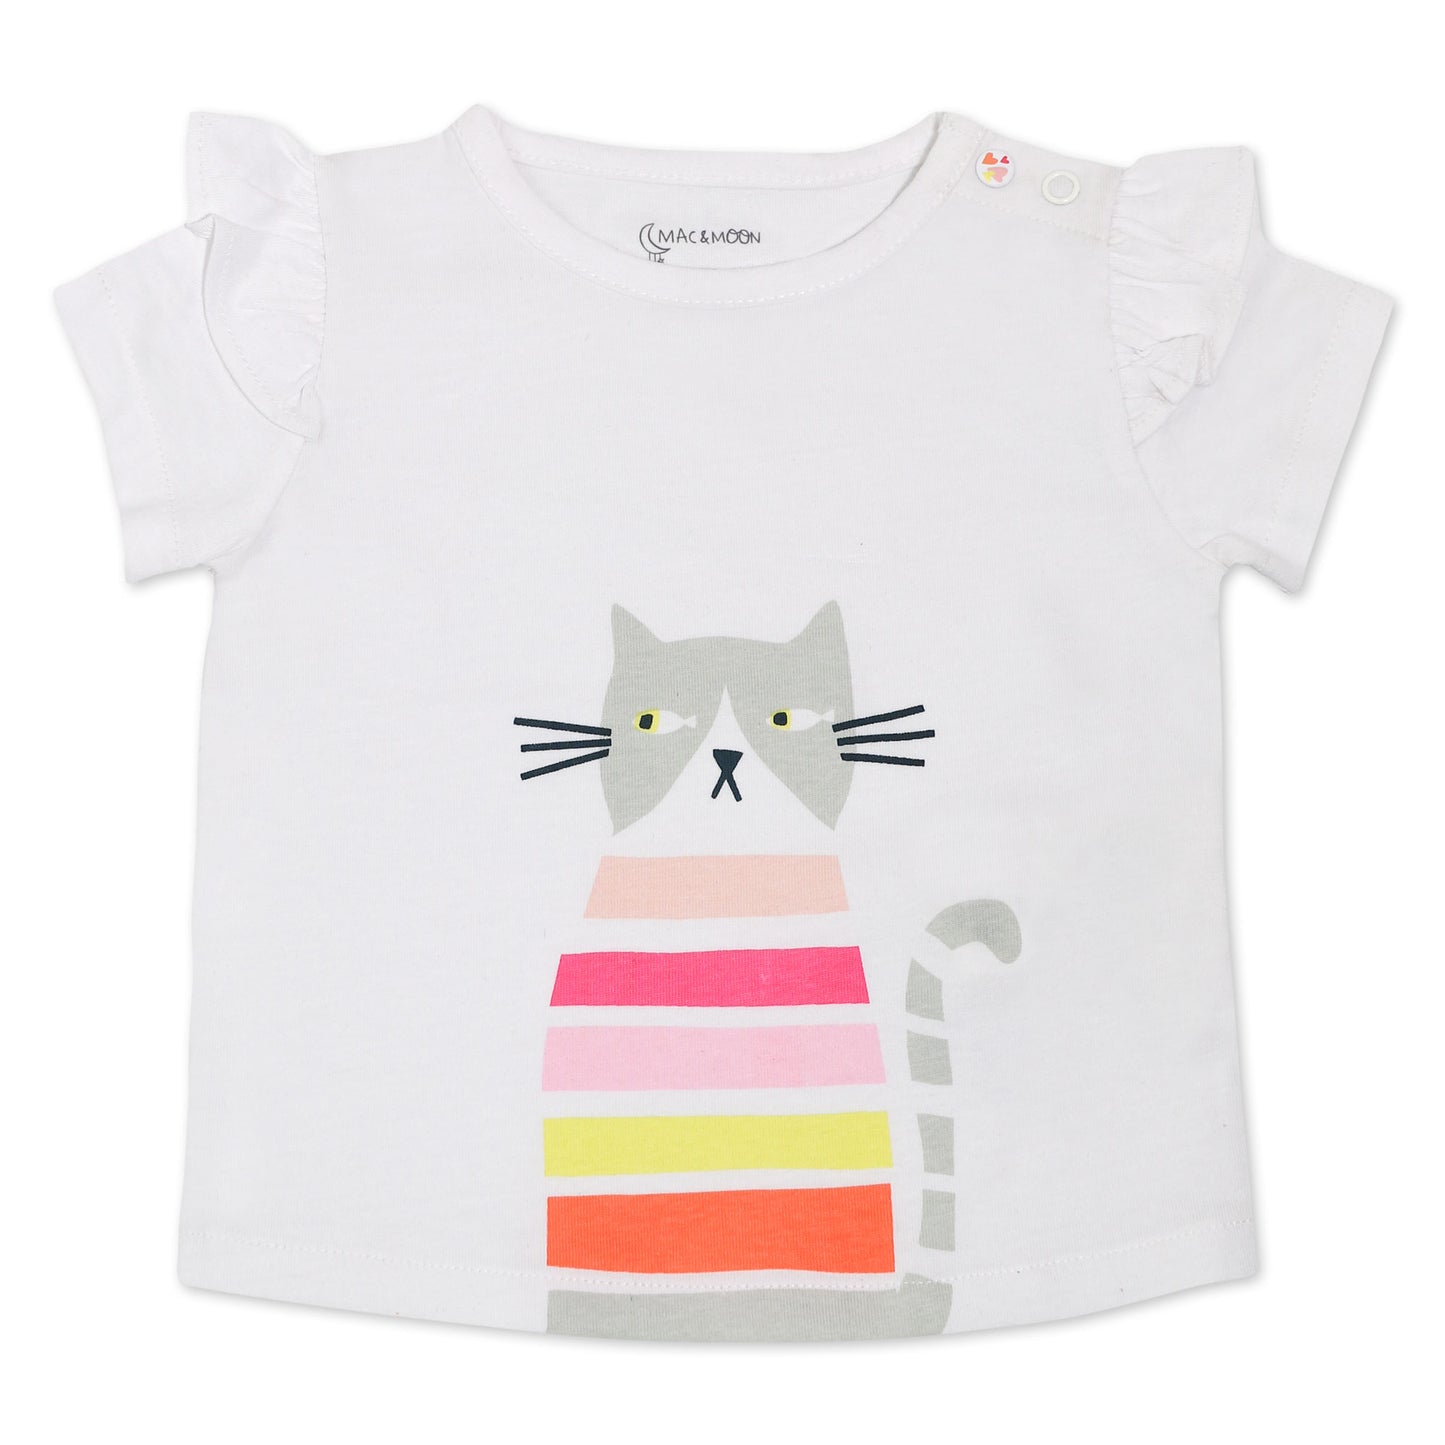 2-Pack Organic Cotton Tops in Caturday Print